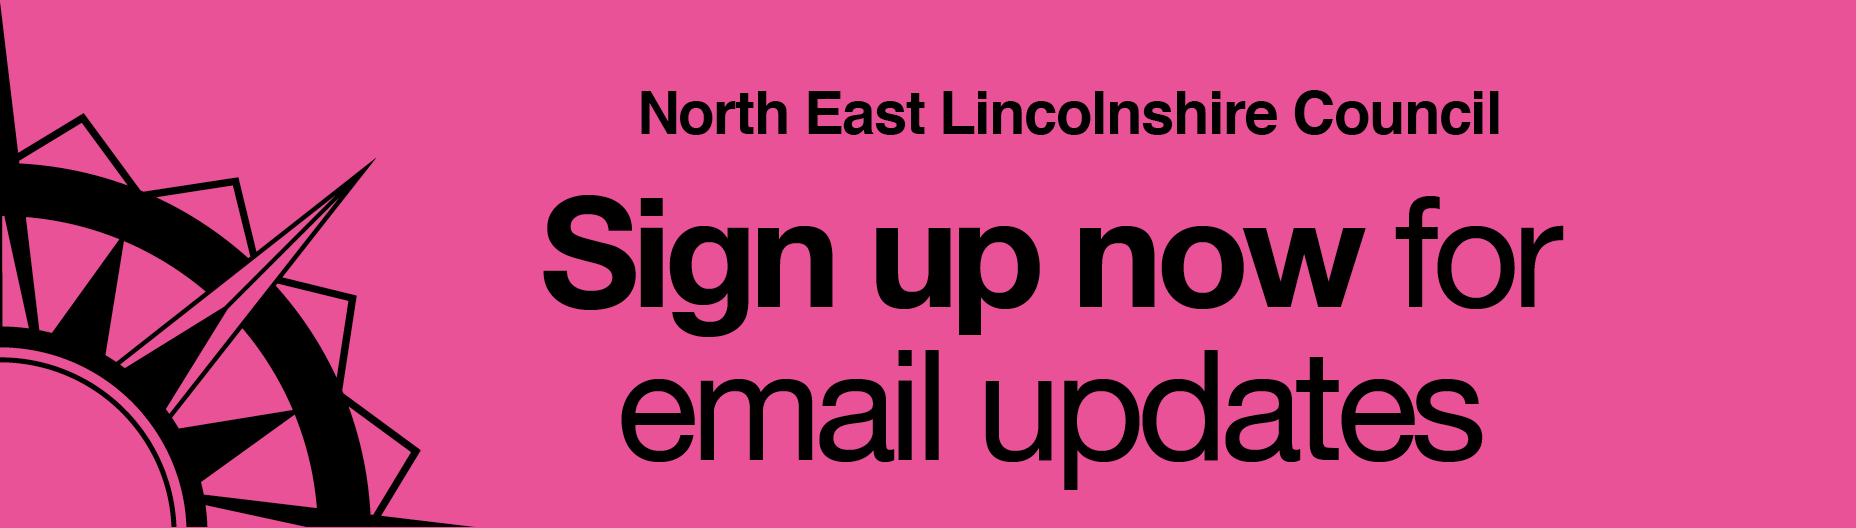 Sign up now for email updates from North East Lincolnshire Council.